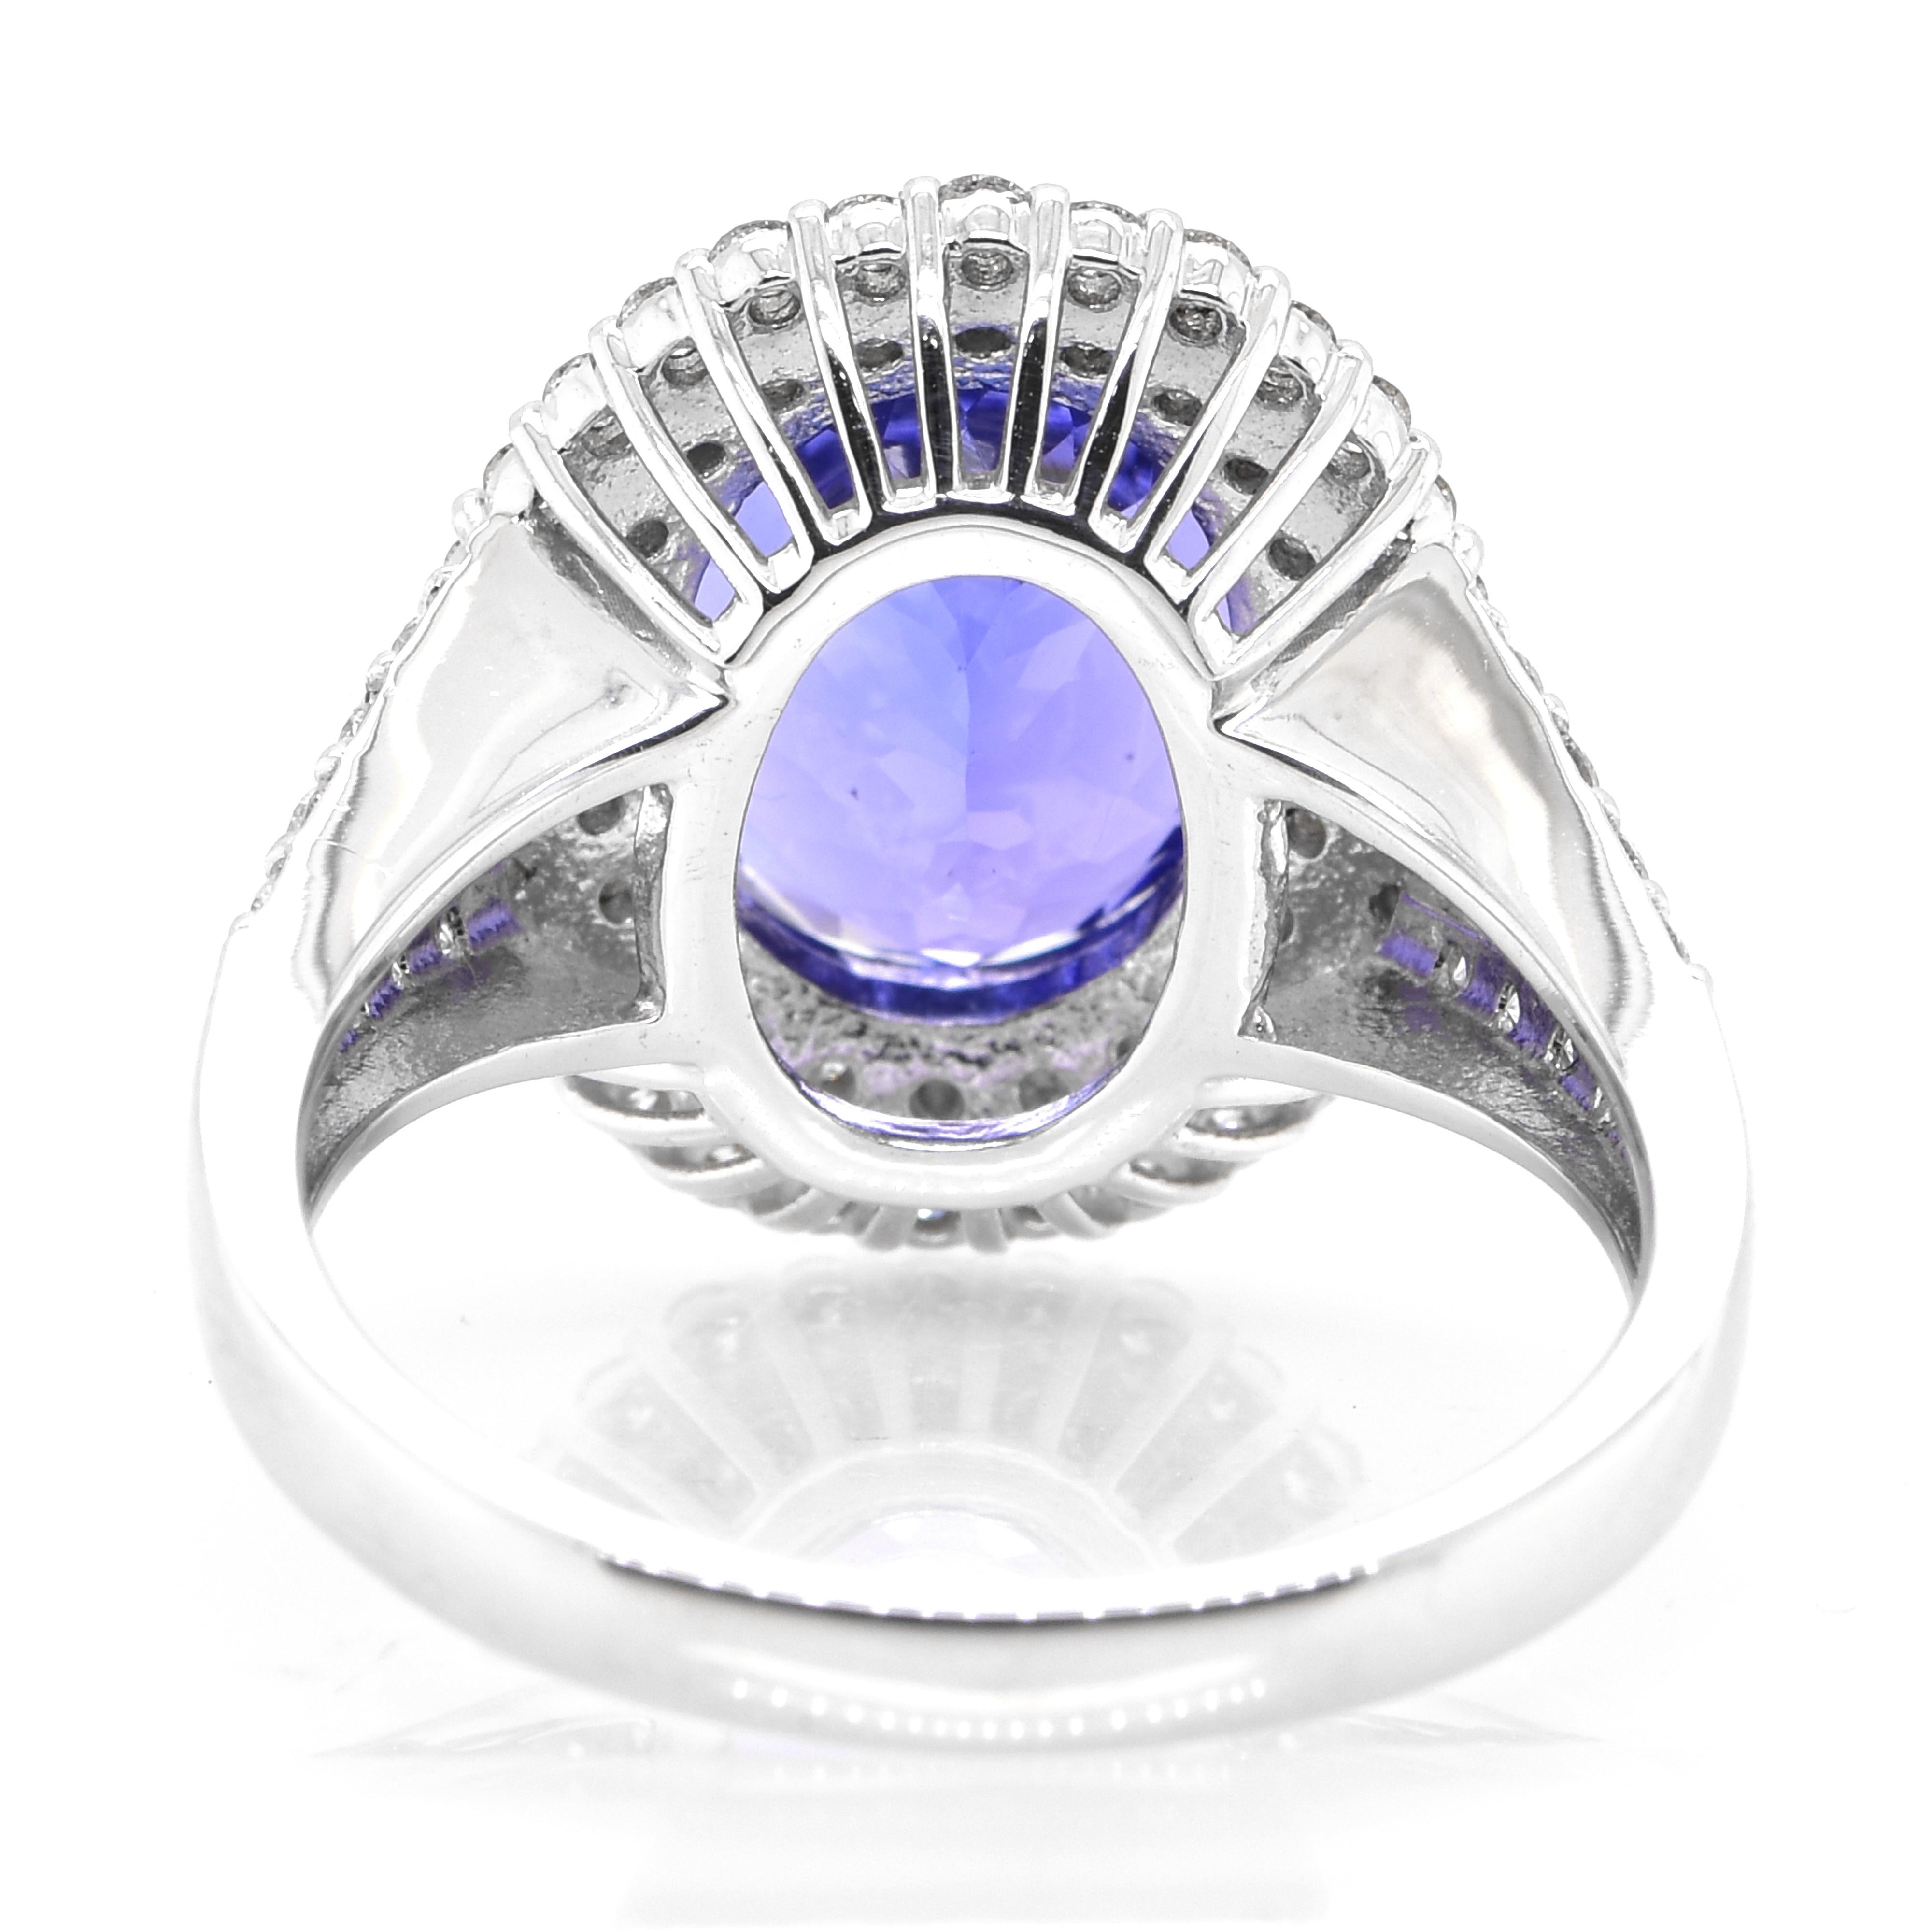 Women's 4.26 Carat Natural Tanzanite and Diamond Cocktail Ring Set in Platinum For Sale